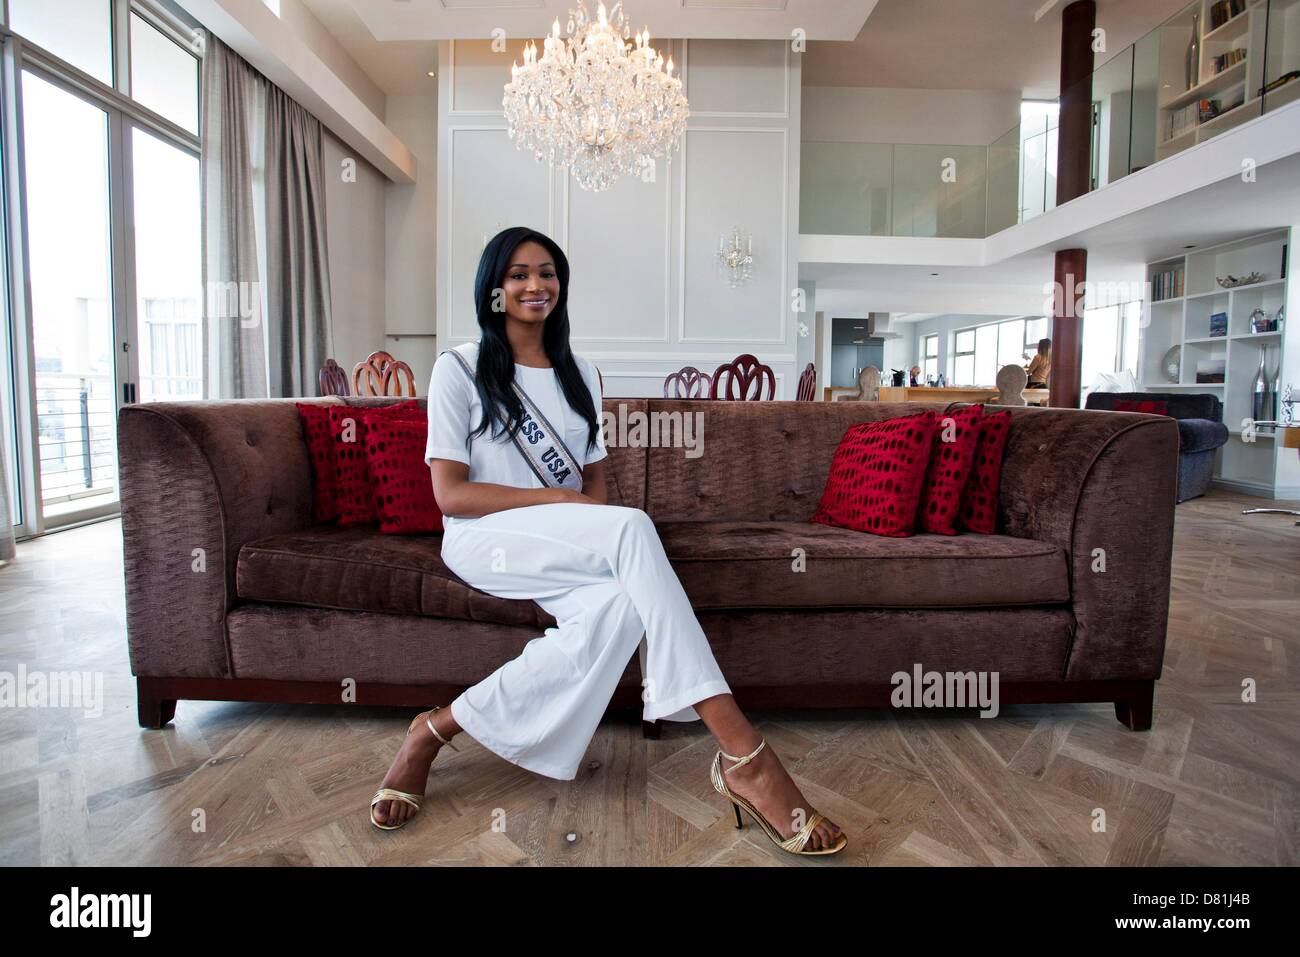 Cape Town, South Africa. May 16, 2013.  Miss America 2013, Nana Meriweather on May 16, 2013, in Cape Town, South Africa. Meriweather is South African born and plans to visit her grandparent, who still live in Soweto. (Photo by Gallo Images / The Times / Anton Scholtz/Alamy Live News) Stock Photo